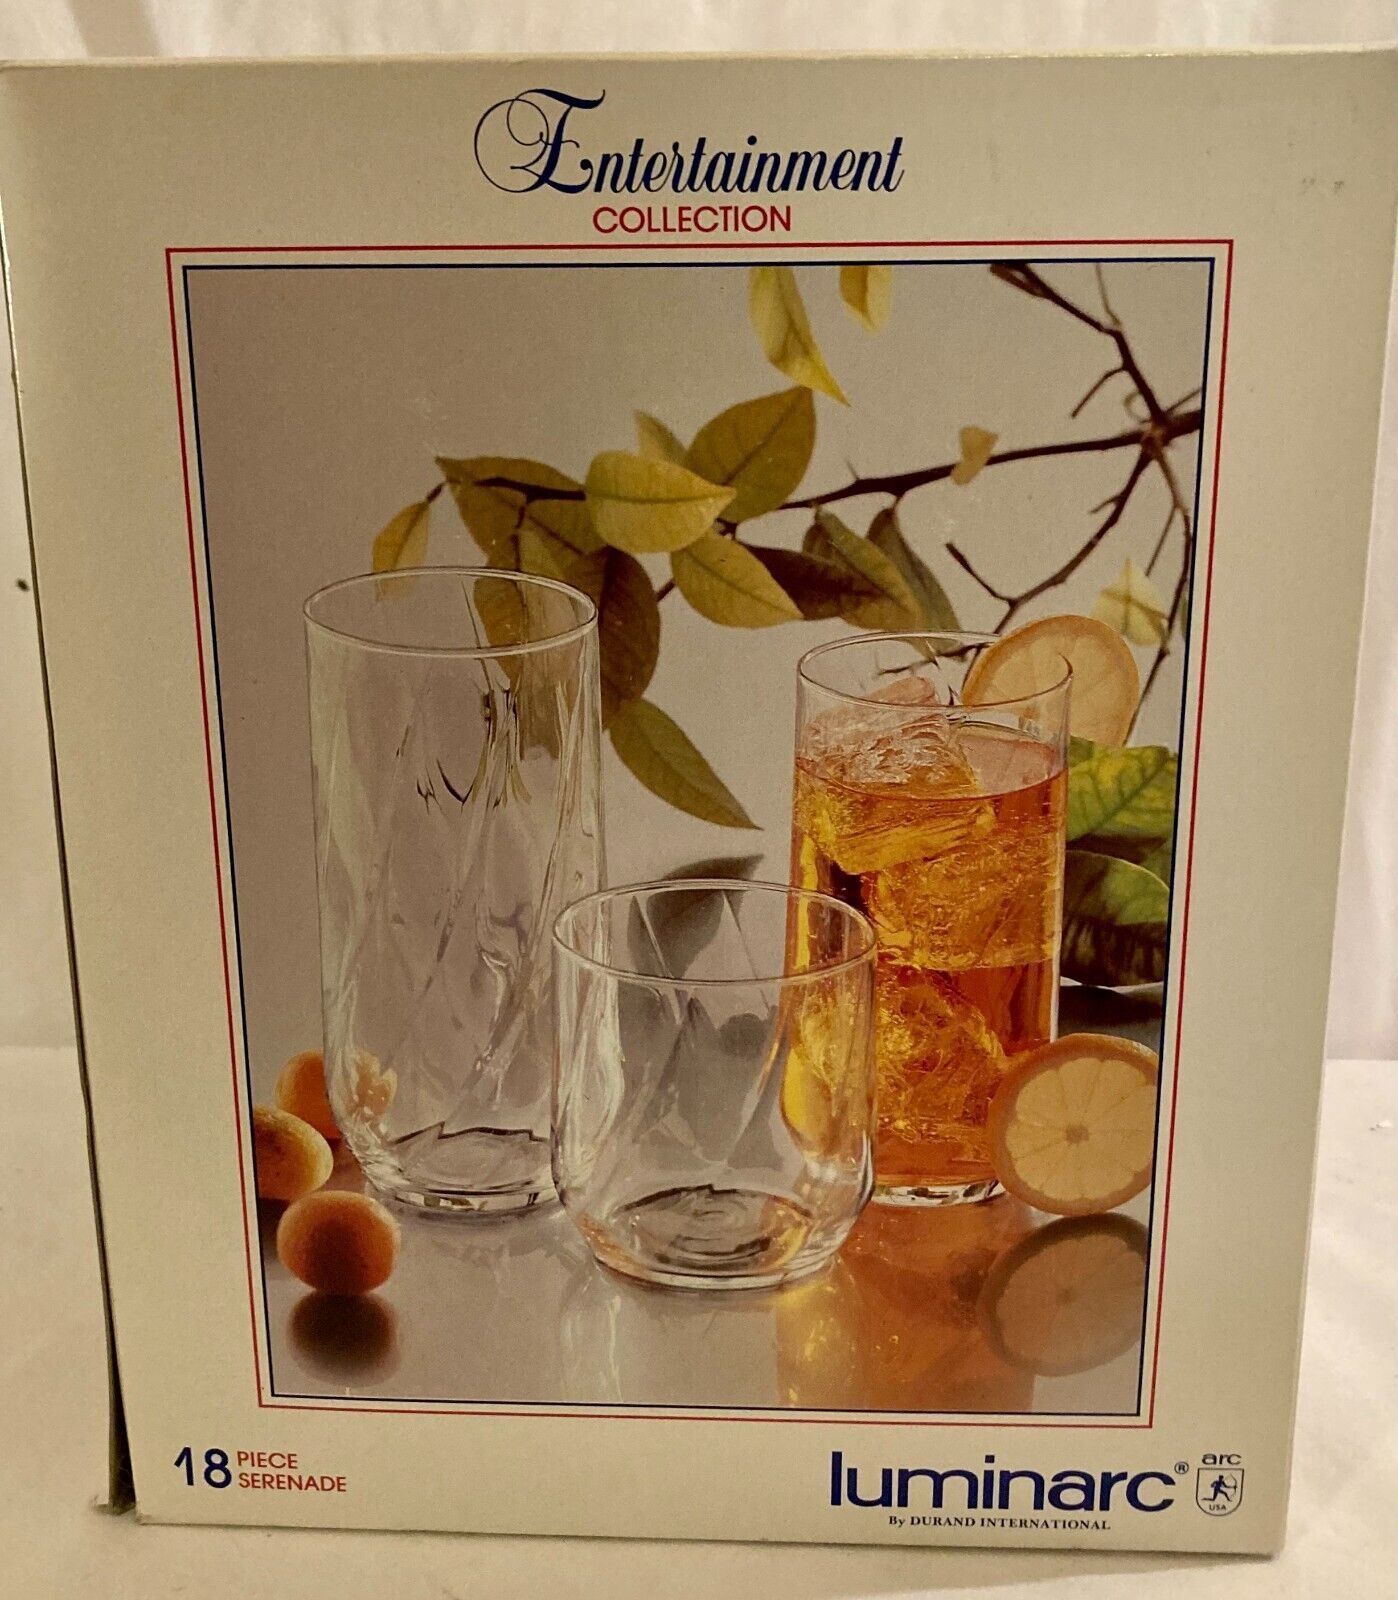 Luminarc Entertainment Collection Glasses Brand New Un-Opened Box Durand